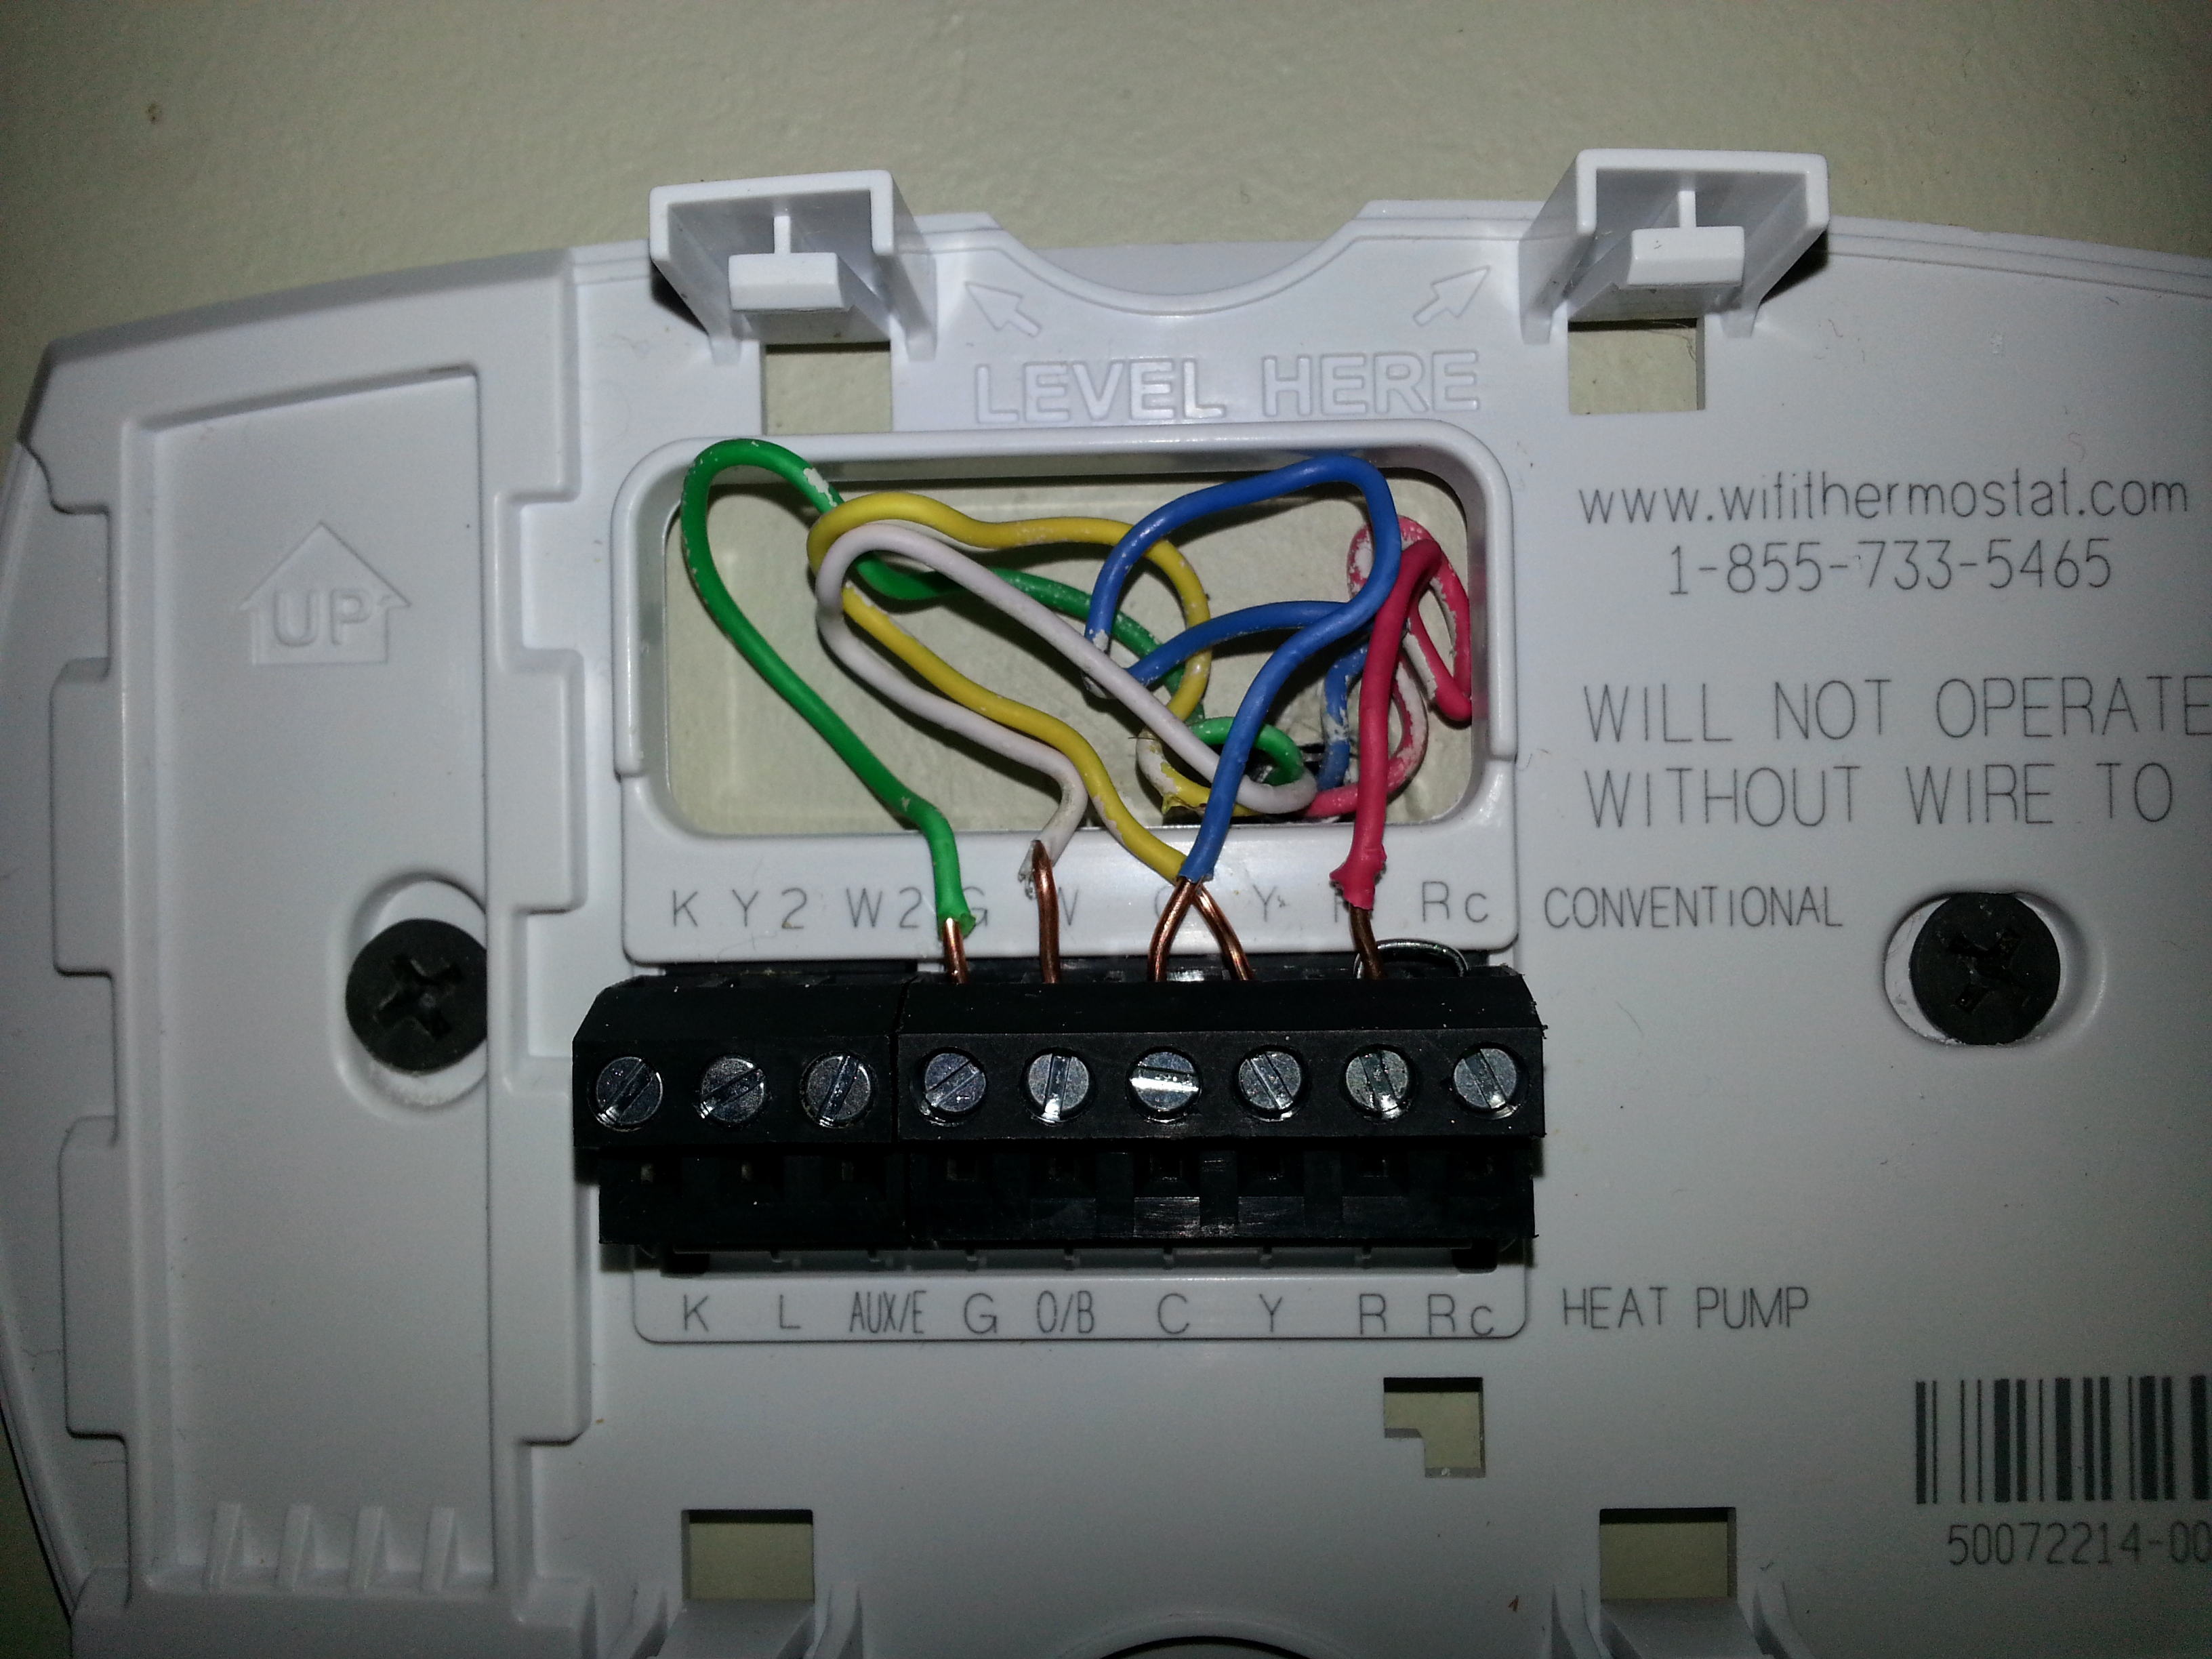 Wiring Diagram Honeywell Thermostat Th6220D1002 | Wiring Library - Honeywell Wifi Thermostat Wiring Diagram